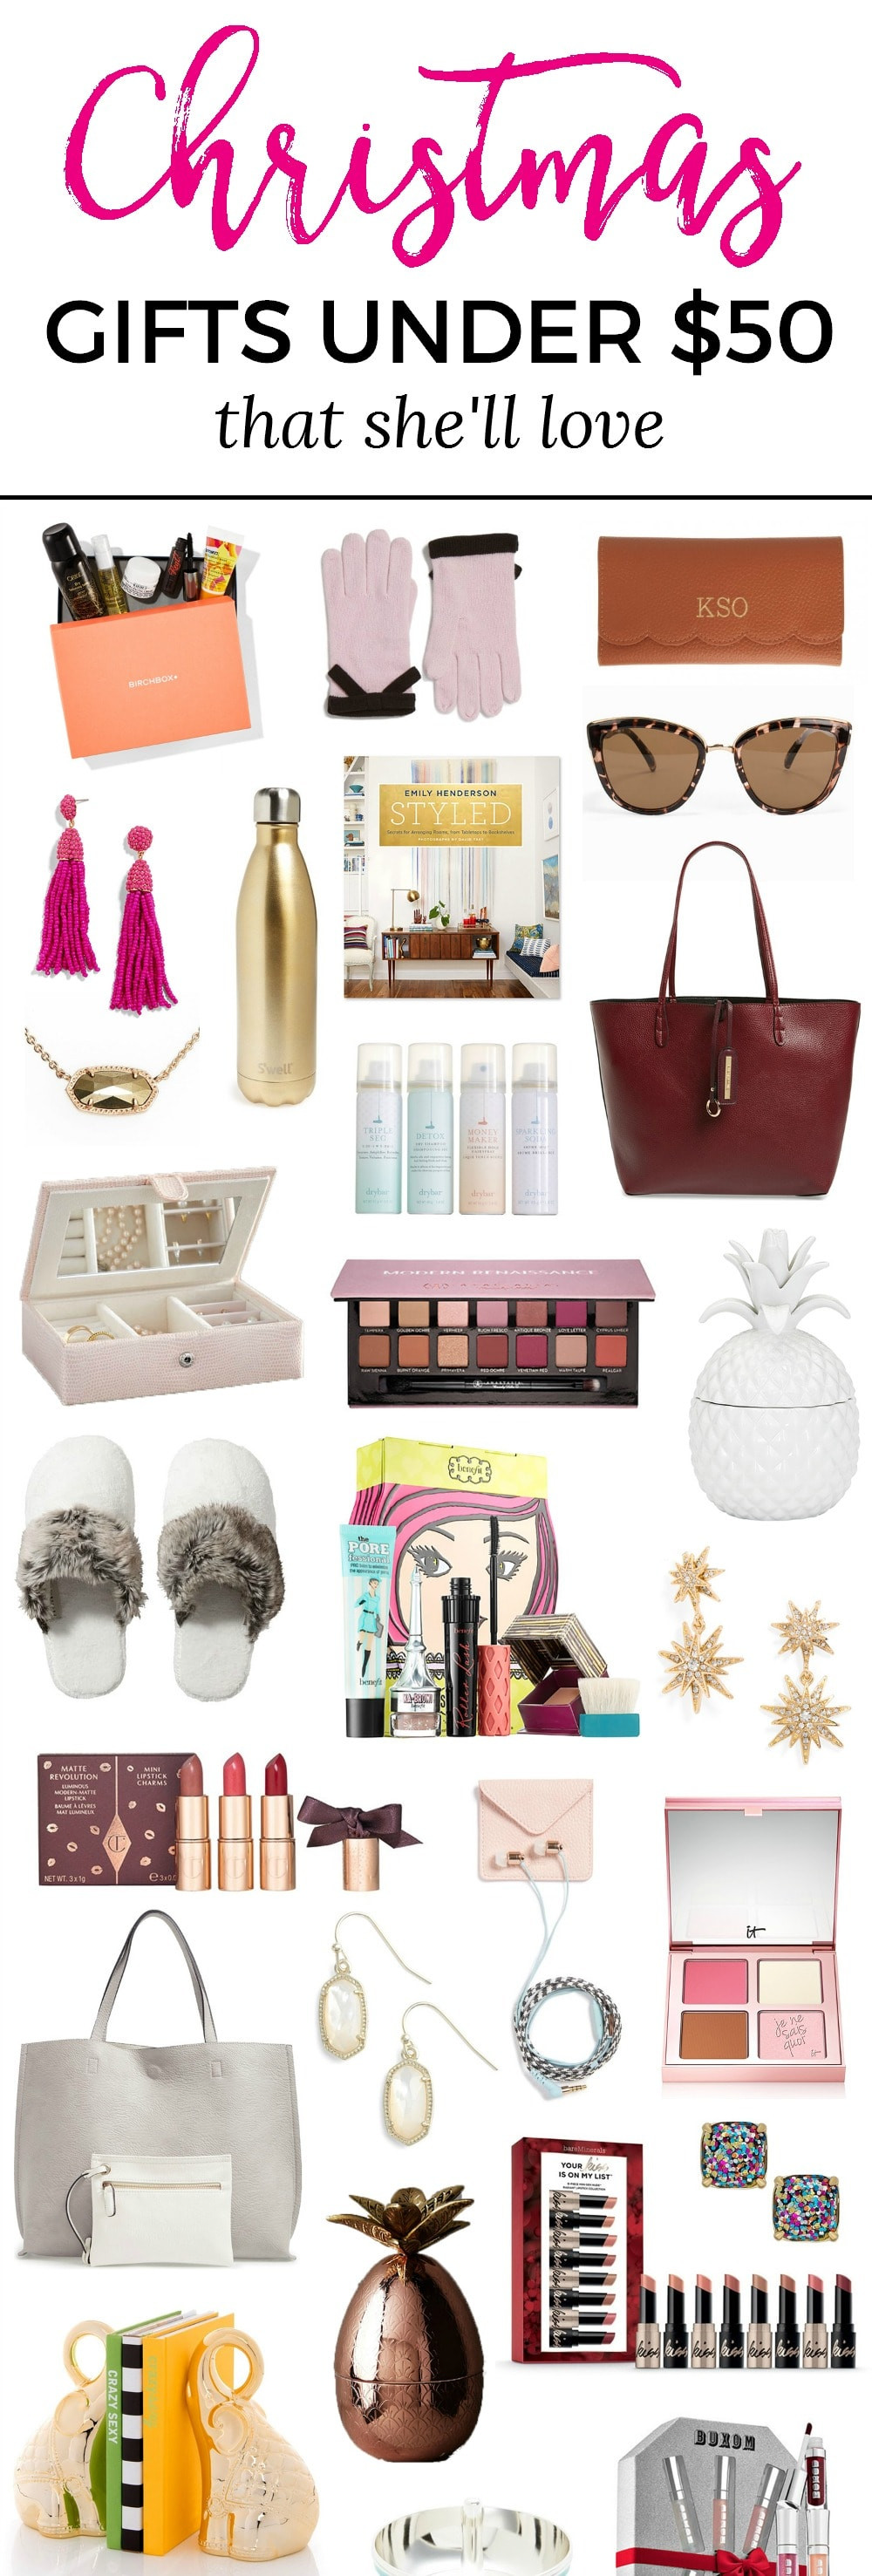 Great Christmas Gift Ideas
 The Best Christmas Gift Ideas for Women under $50